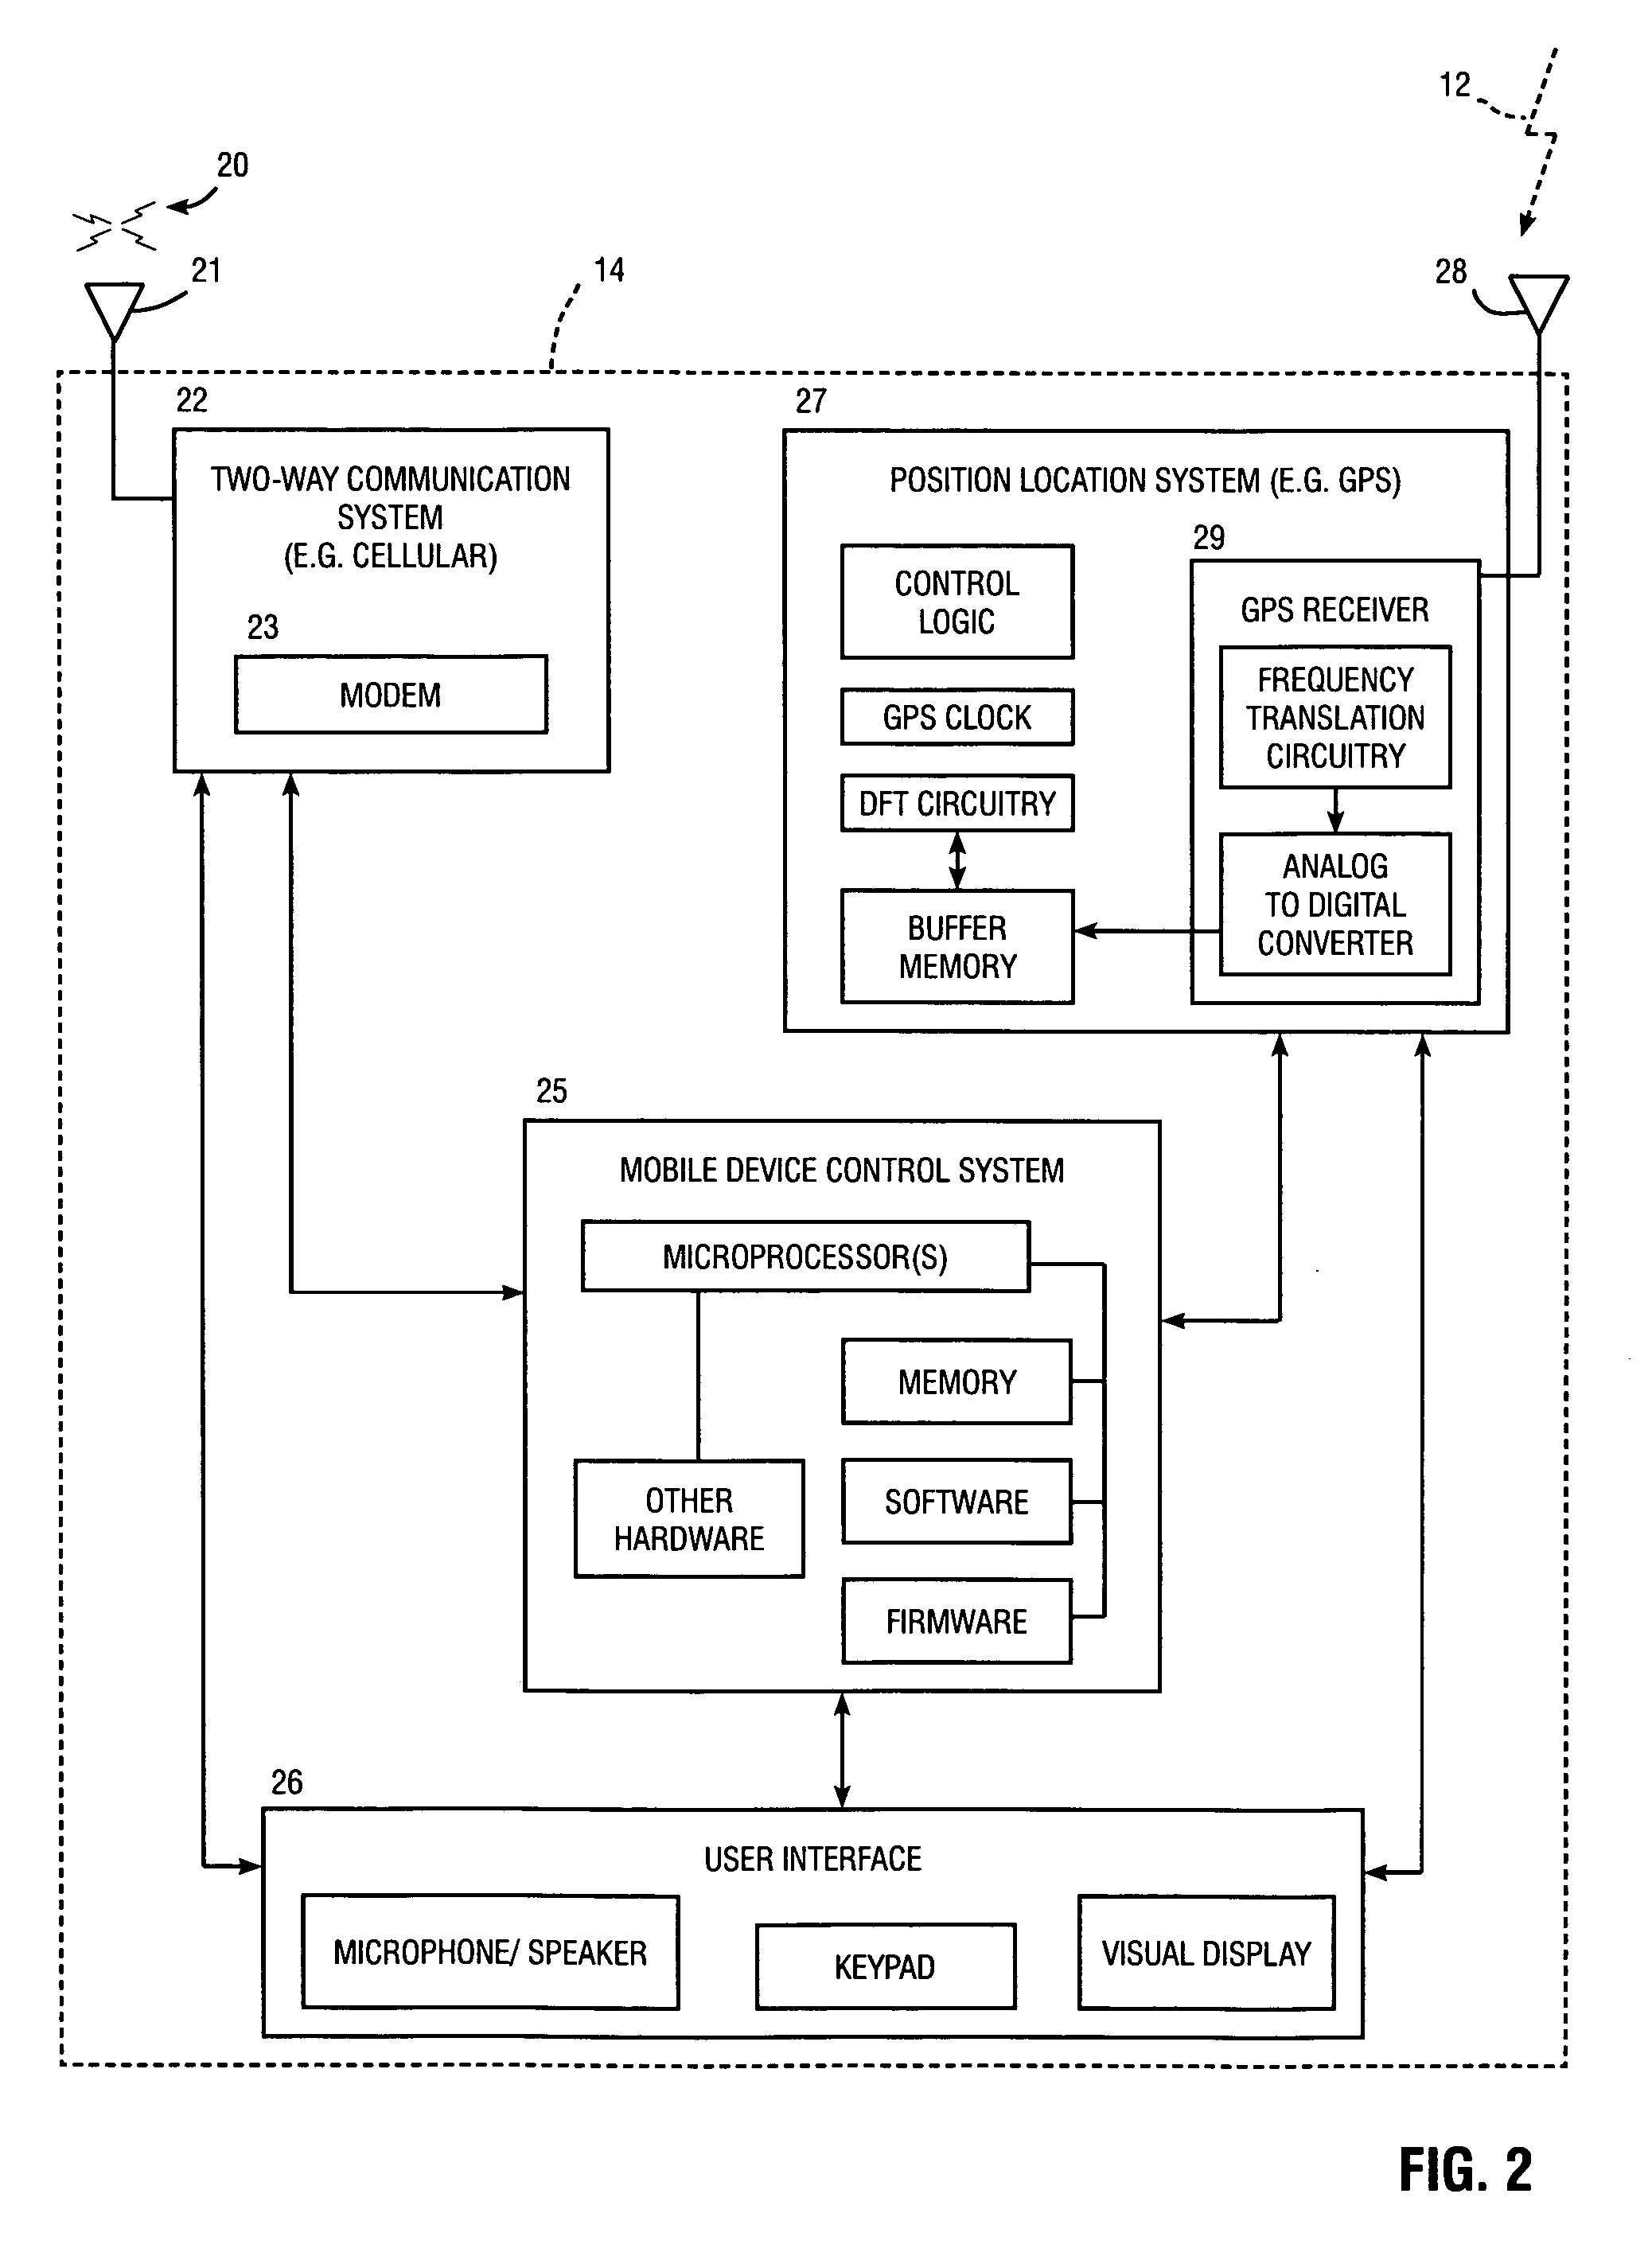 Method and apparatus for increasing coherent integration length while receiving a positioning signal